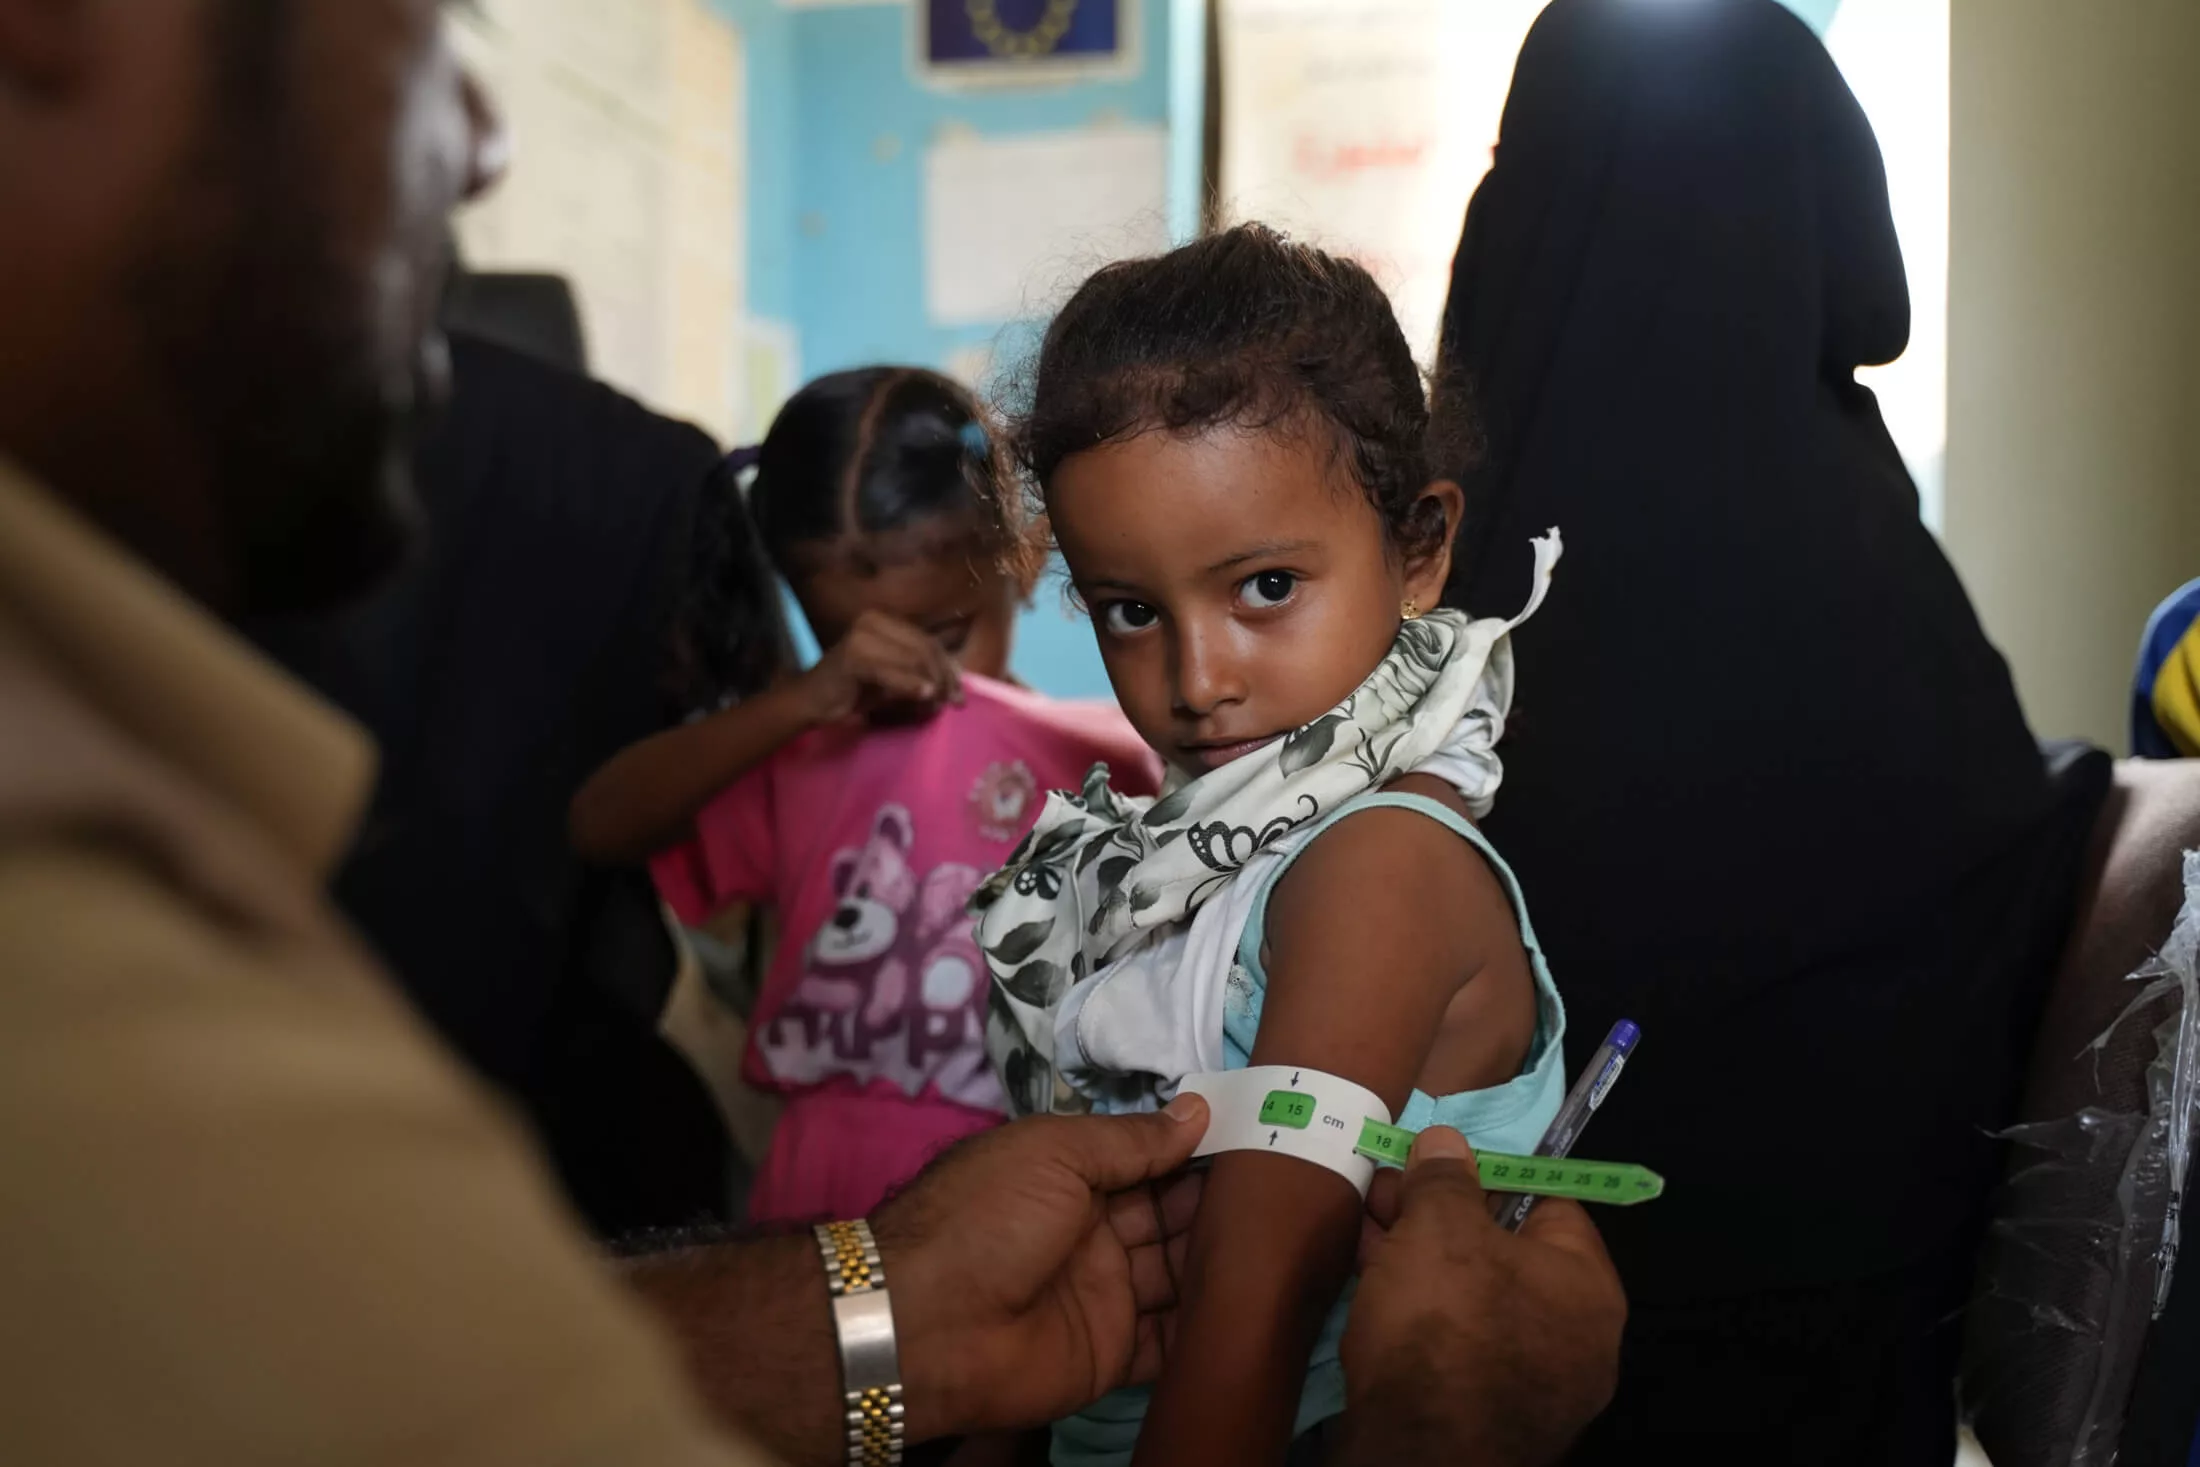 An International Medical Corps health and nutrition assistant measures 2-year-old Ateekah Alaa’s mid-upper arm circumference (MUAC) to check her nutritional status.